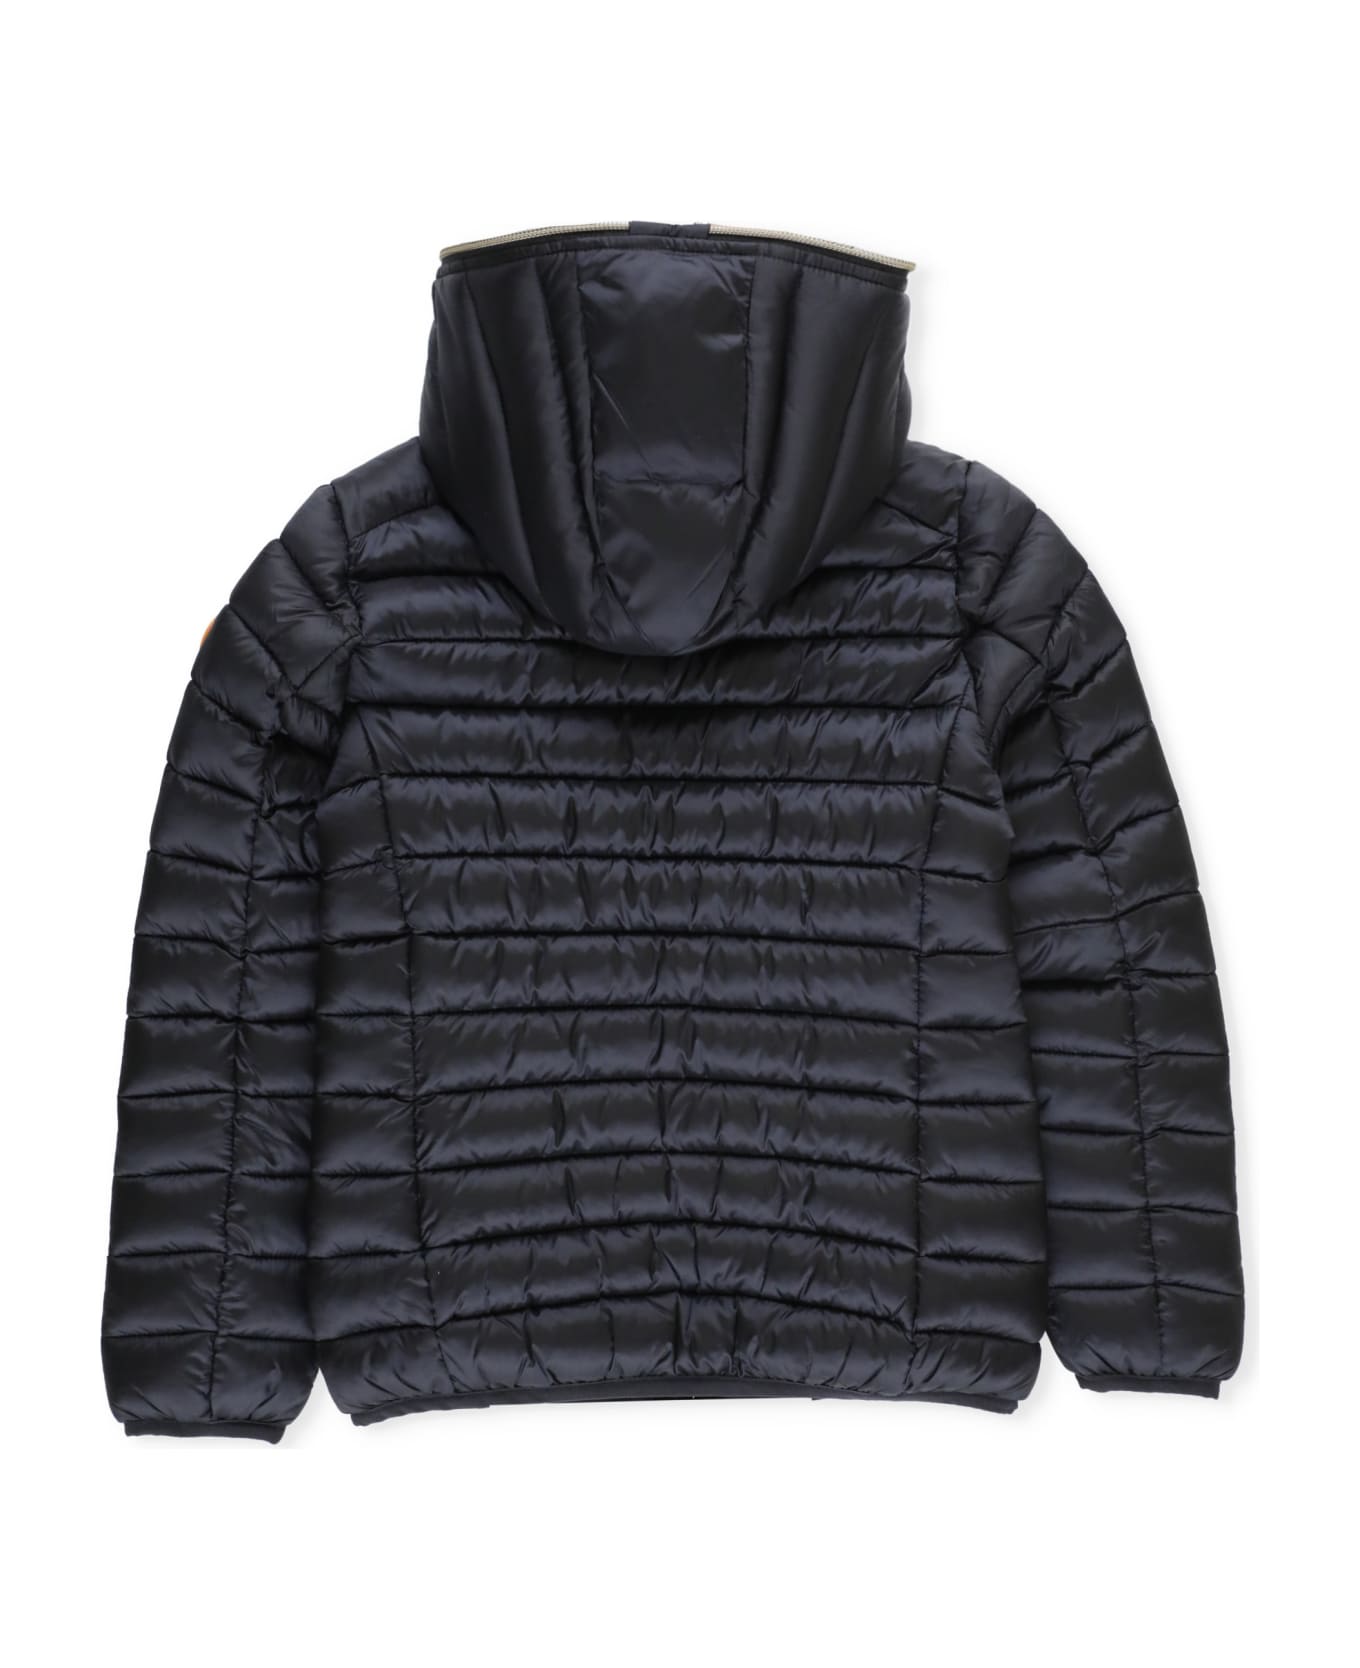 Save the Duck Rosy Jacket - Black